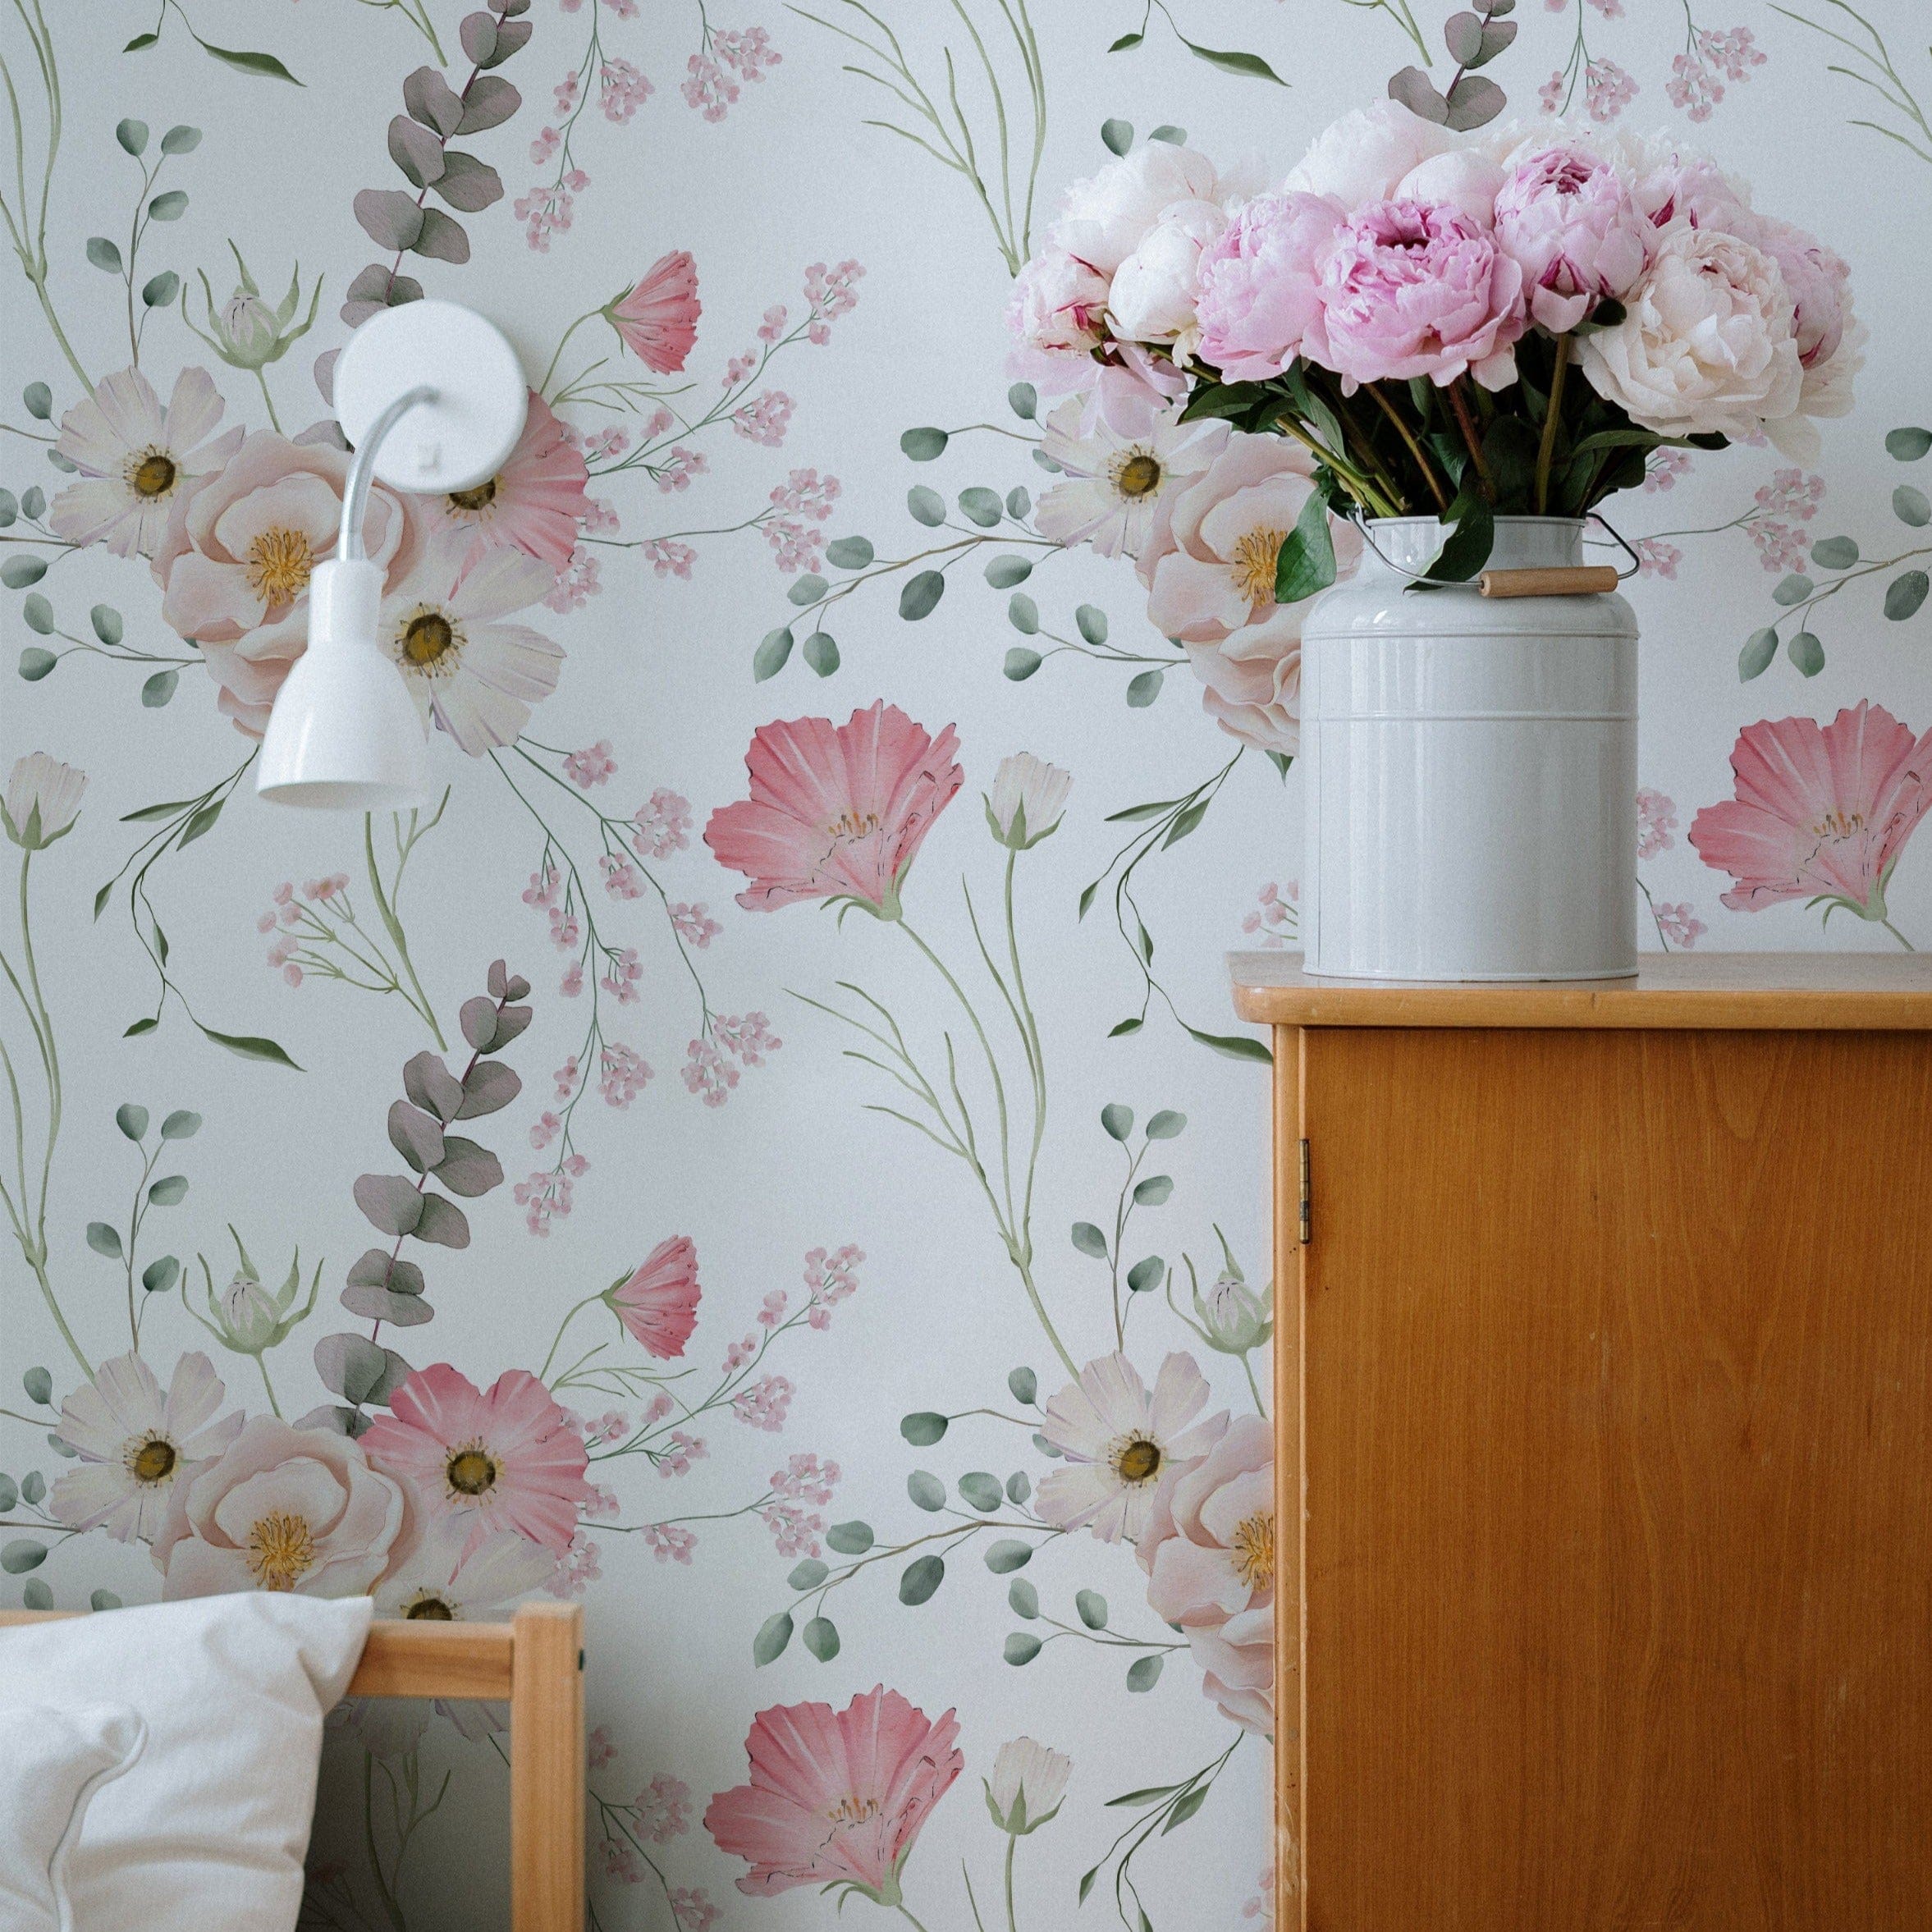 Flourish Wallpaper in a charming bedroom setting with a wooden dresser, a white wall sconce, and a vase of pink flowers. The wallpaper features a soft floral design with pink and white flowers and green foliage.